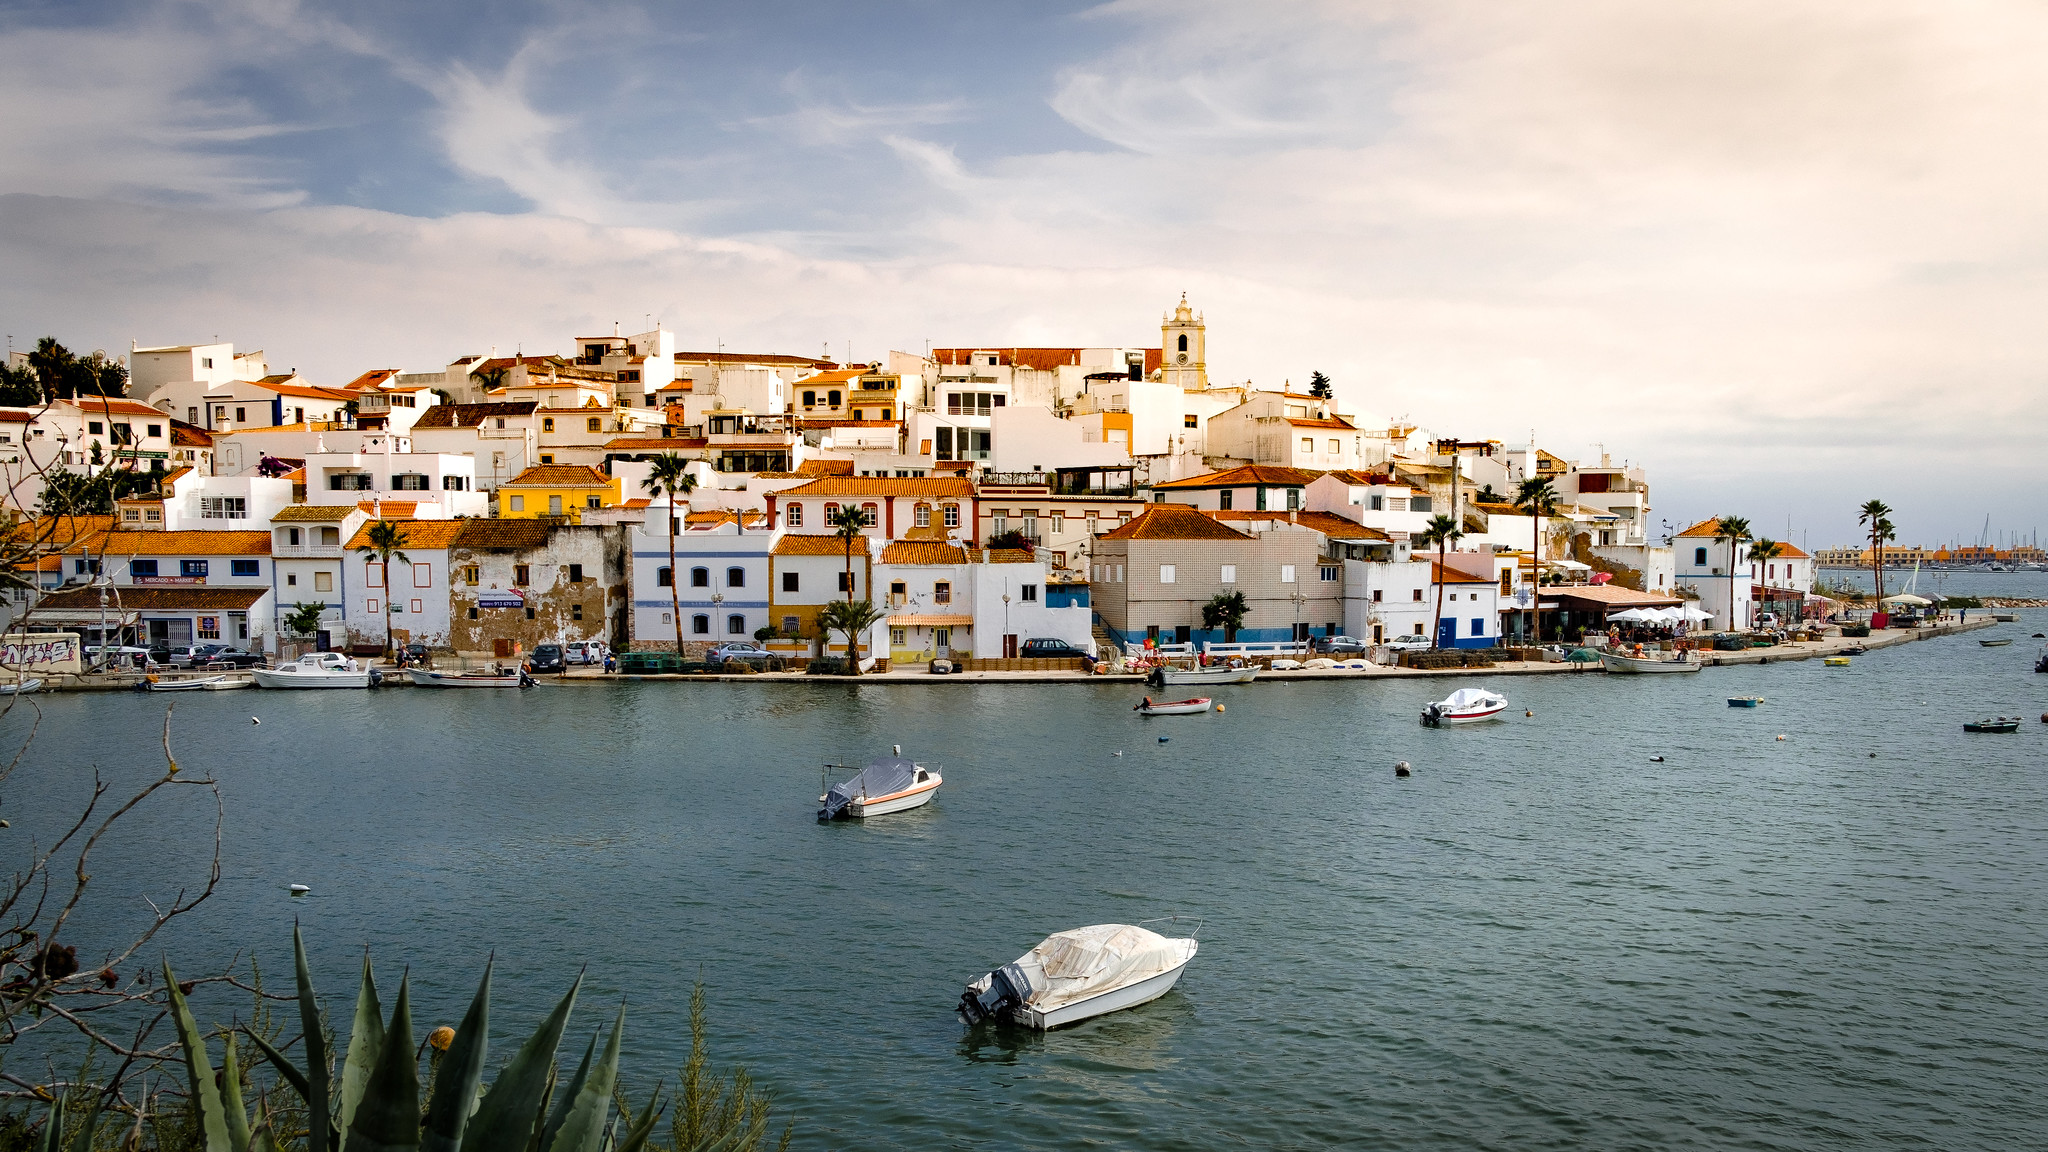 One of Portugal's many hidden gems, a beautiful village on the sea.